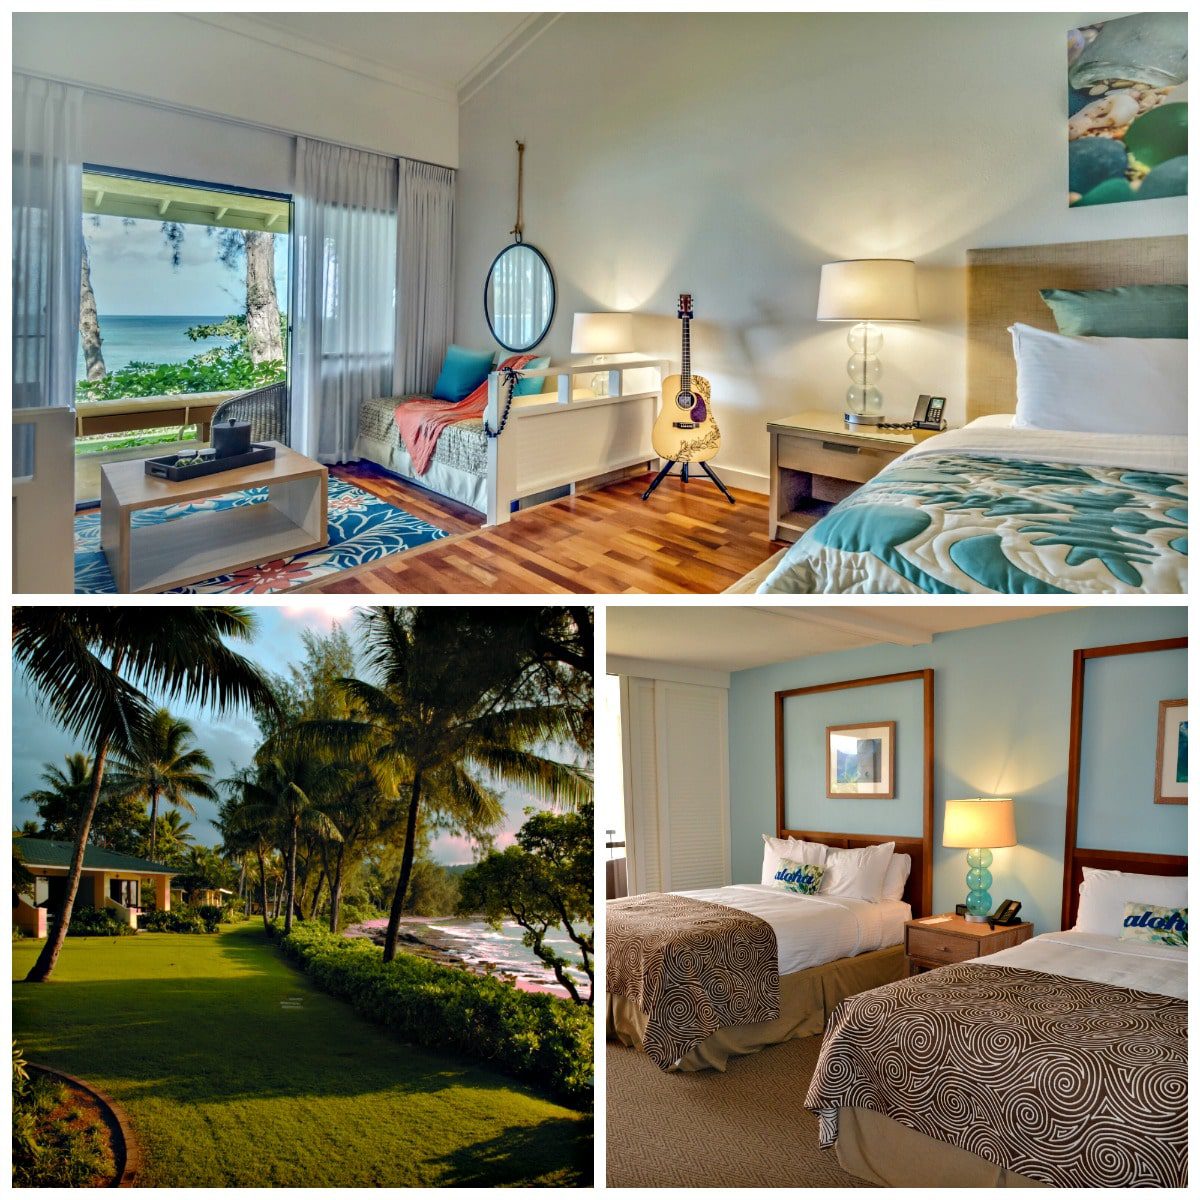 Rooms and cottages share similar ocean decor. Cottage photo by Turtle Bay Resort.